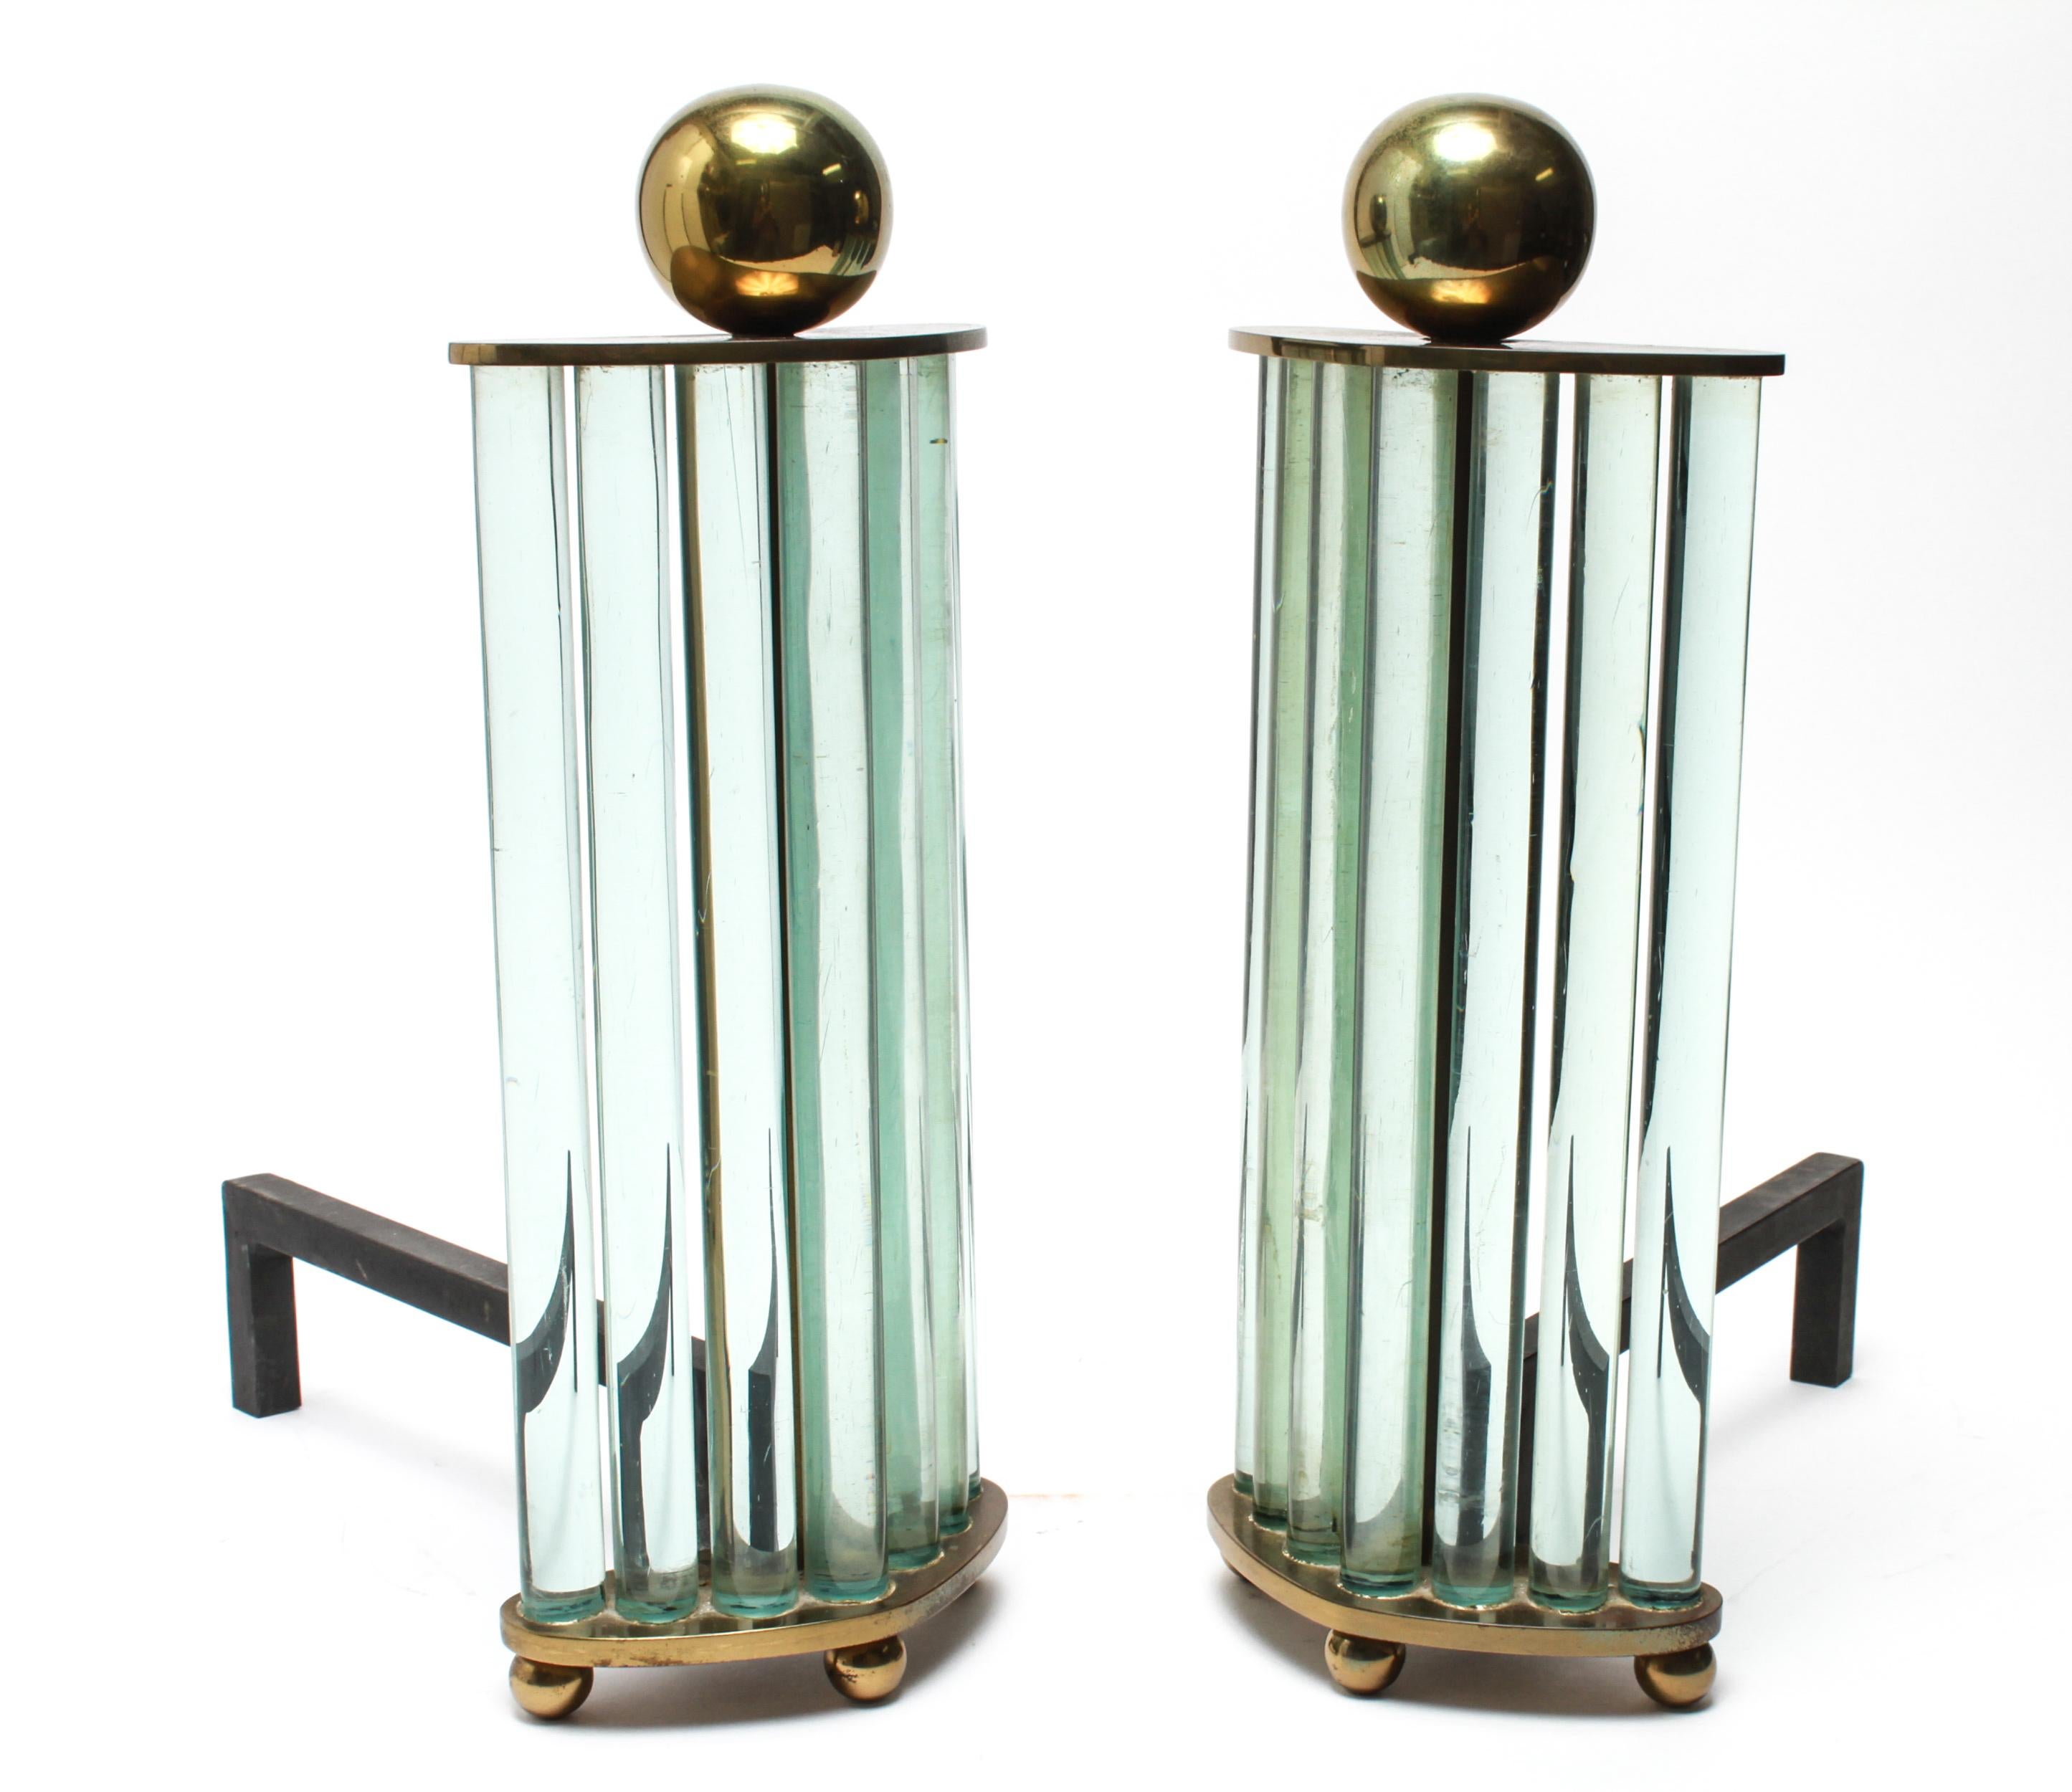 20th Century William H. Jackson Company Modernist Brass and Glass Andirons